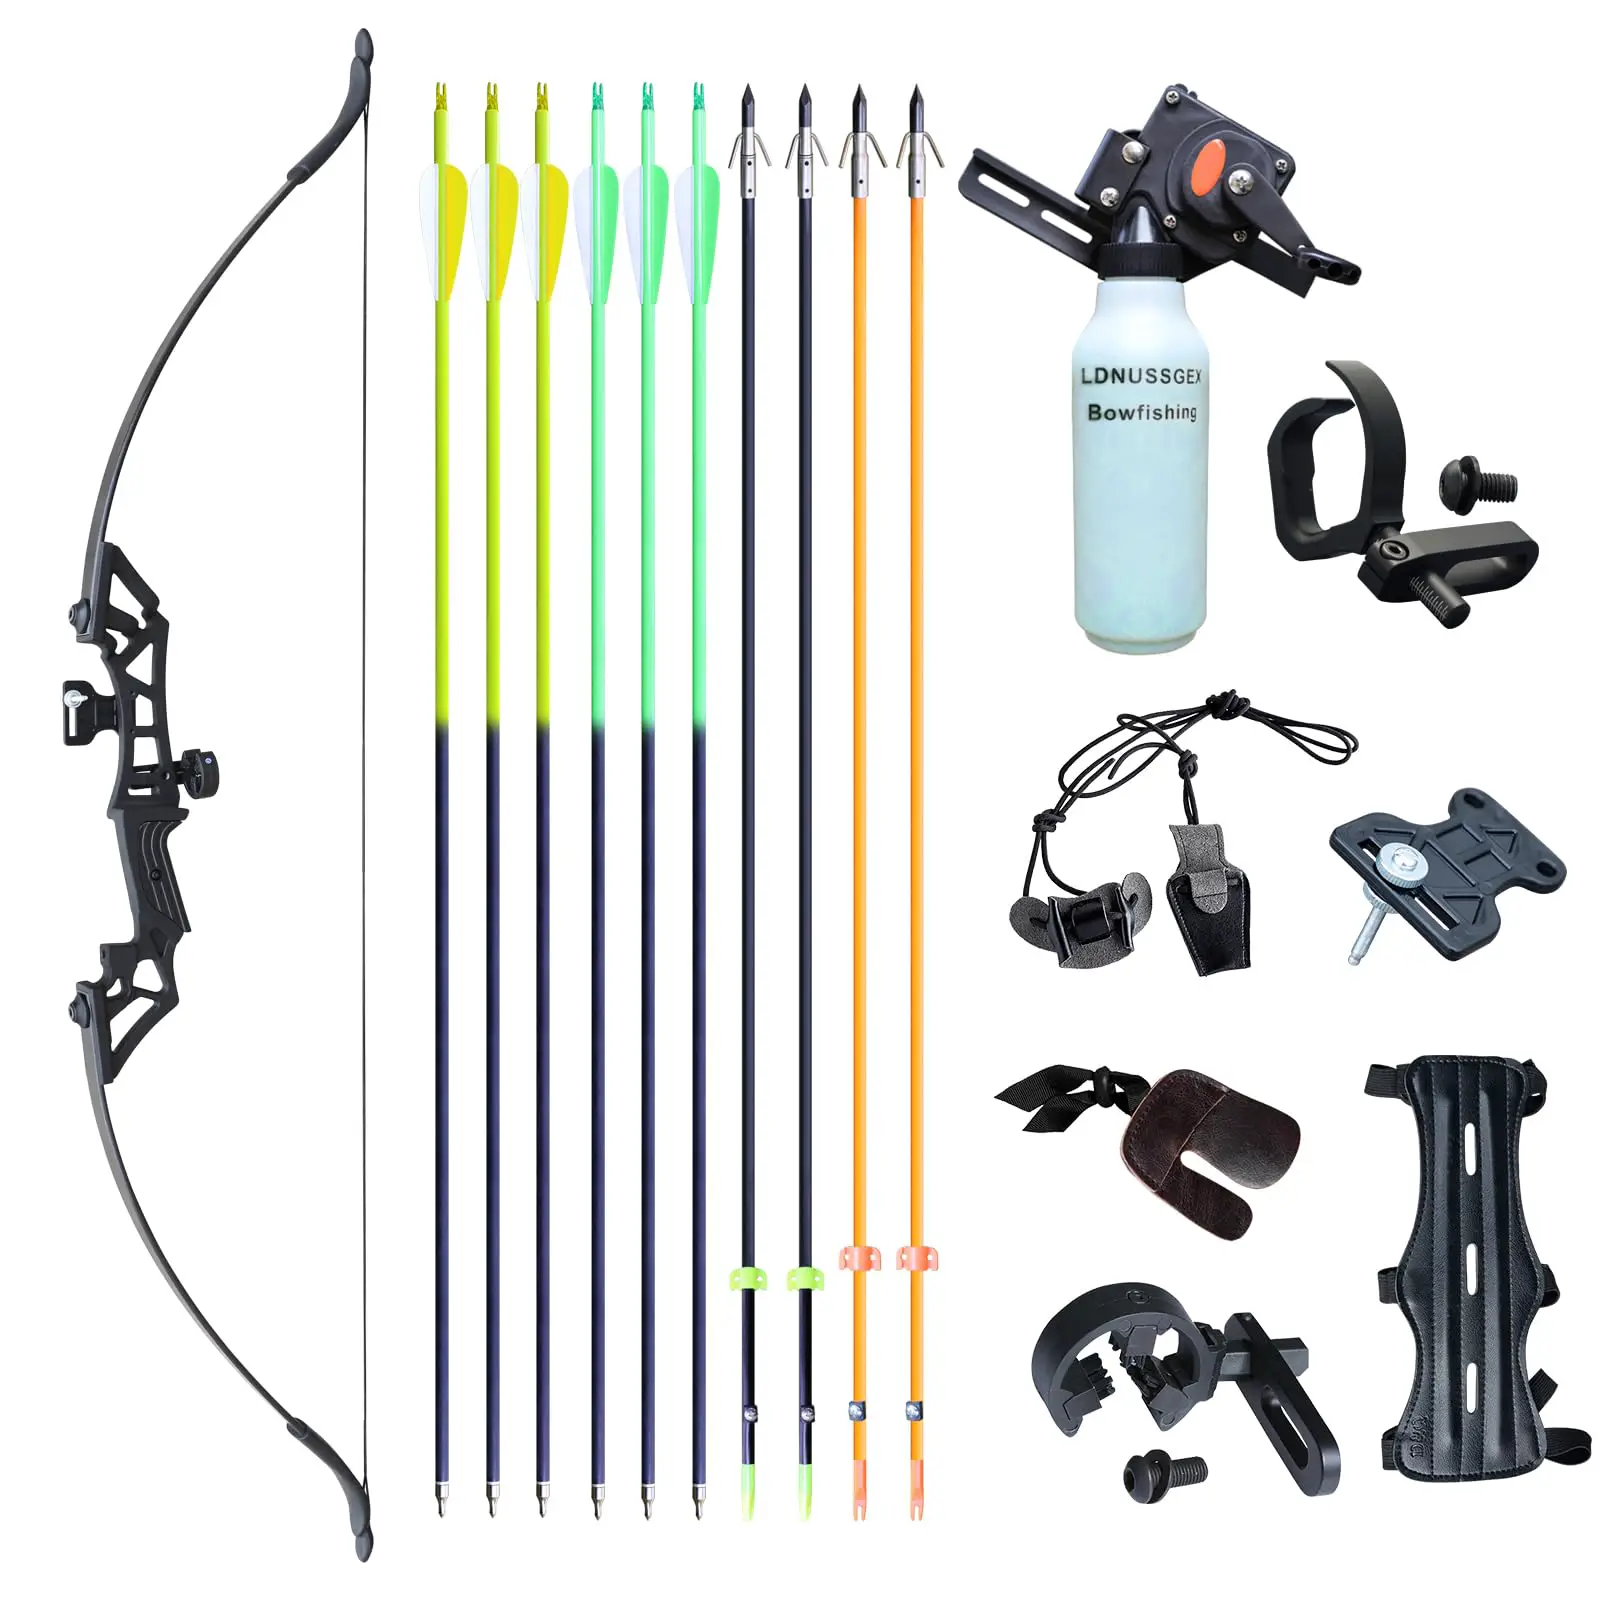 LDNUSSGEX 40lbs Bow Fishing Combo Kit Archery Recurve Bow Set, Bowfishing Bow and Arrow Adult Beginner, Bottle Fishing Reel Bowfishing Arrows for Fishing, Carbon Arrows for Hunting Target Practice